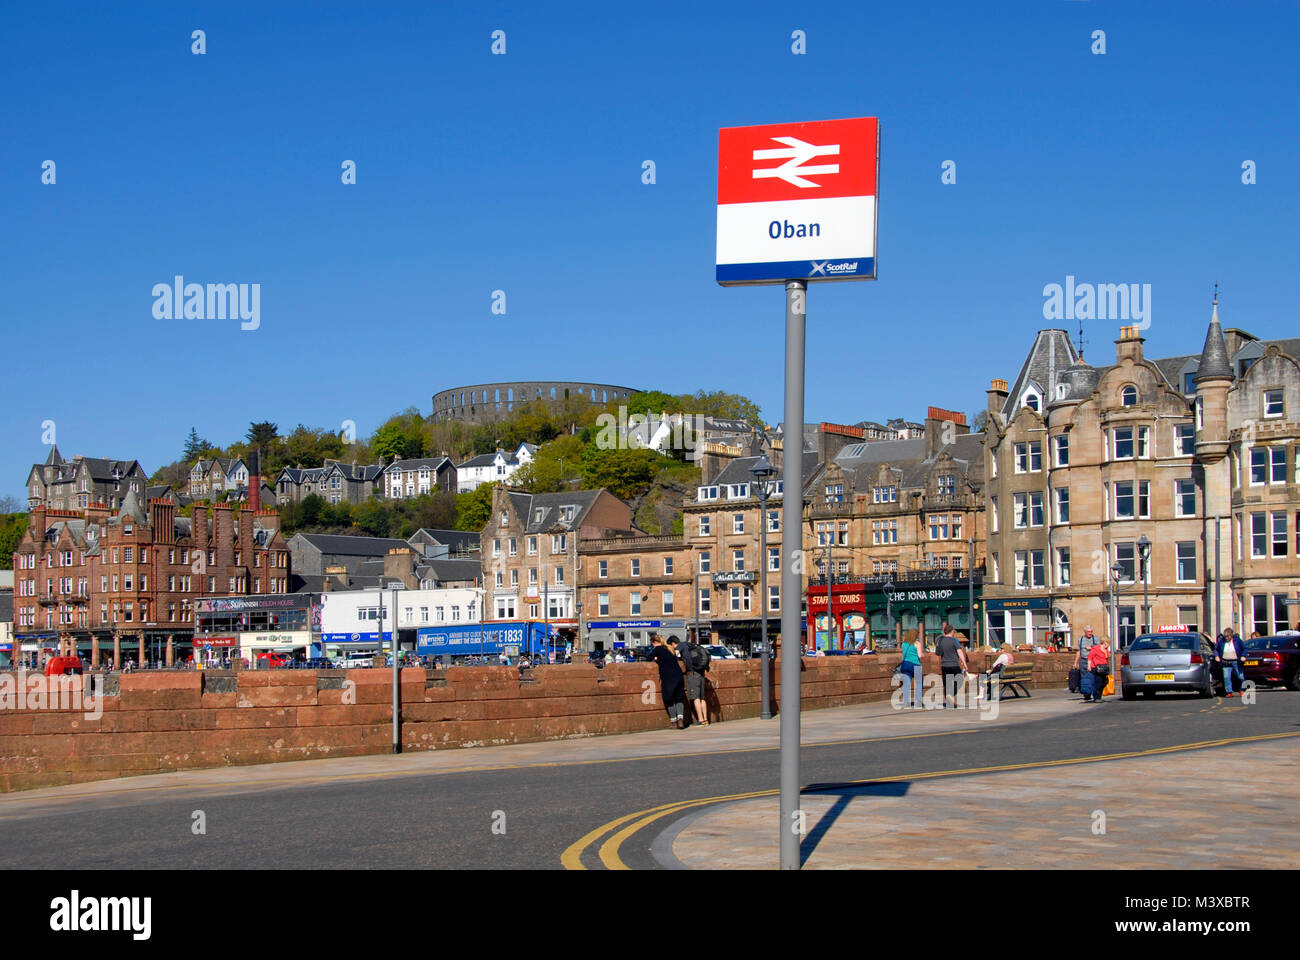 Oban, Argyll, with railway sign prominent in foreground Stock Photo